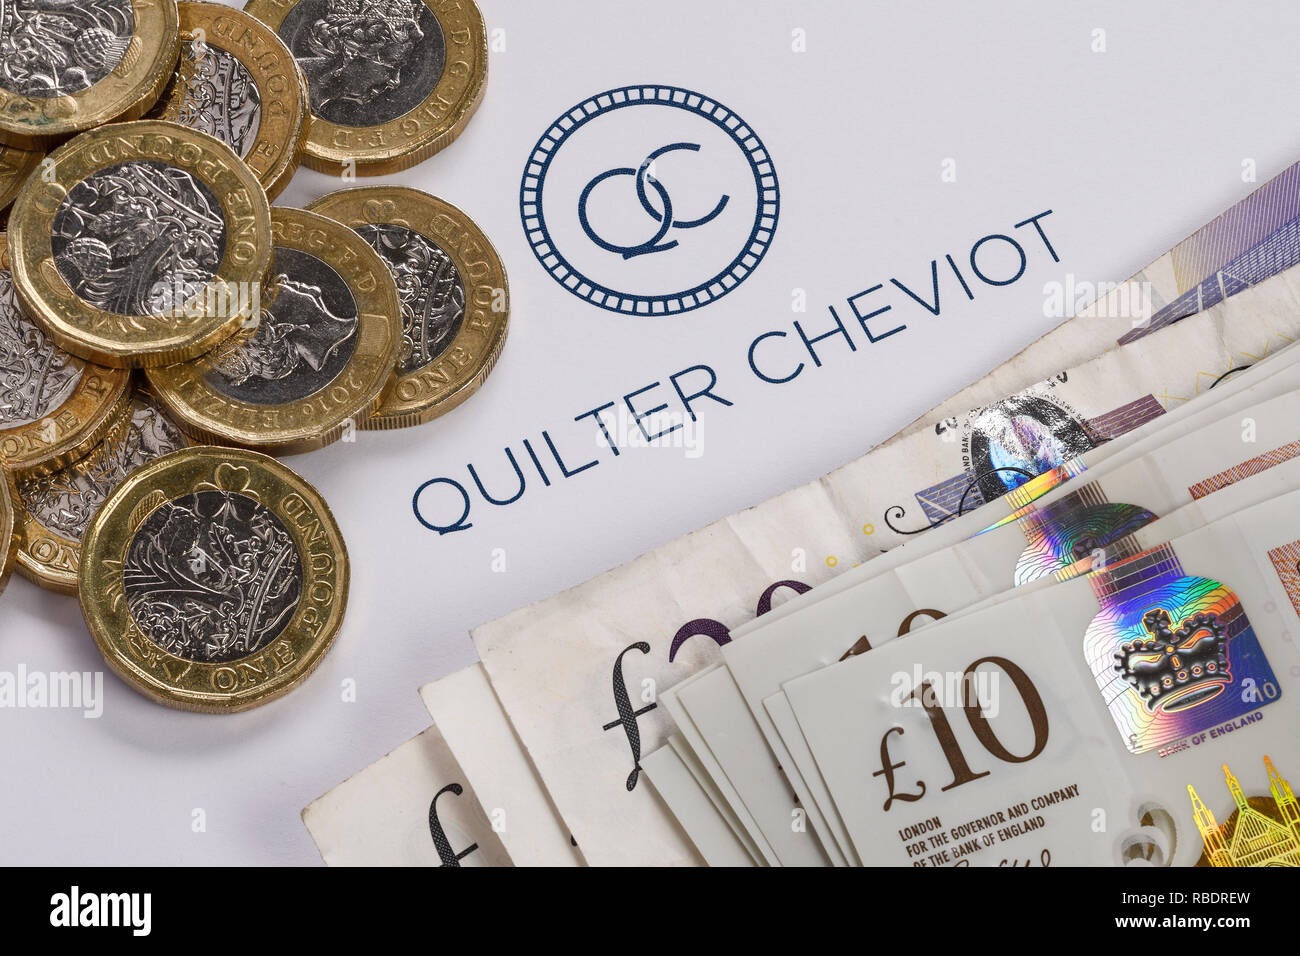 A Quilter Cheviot logo with some cash Stock Photo